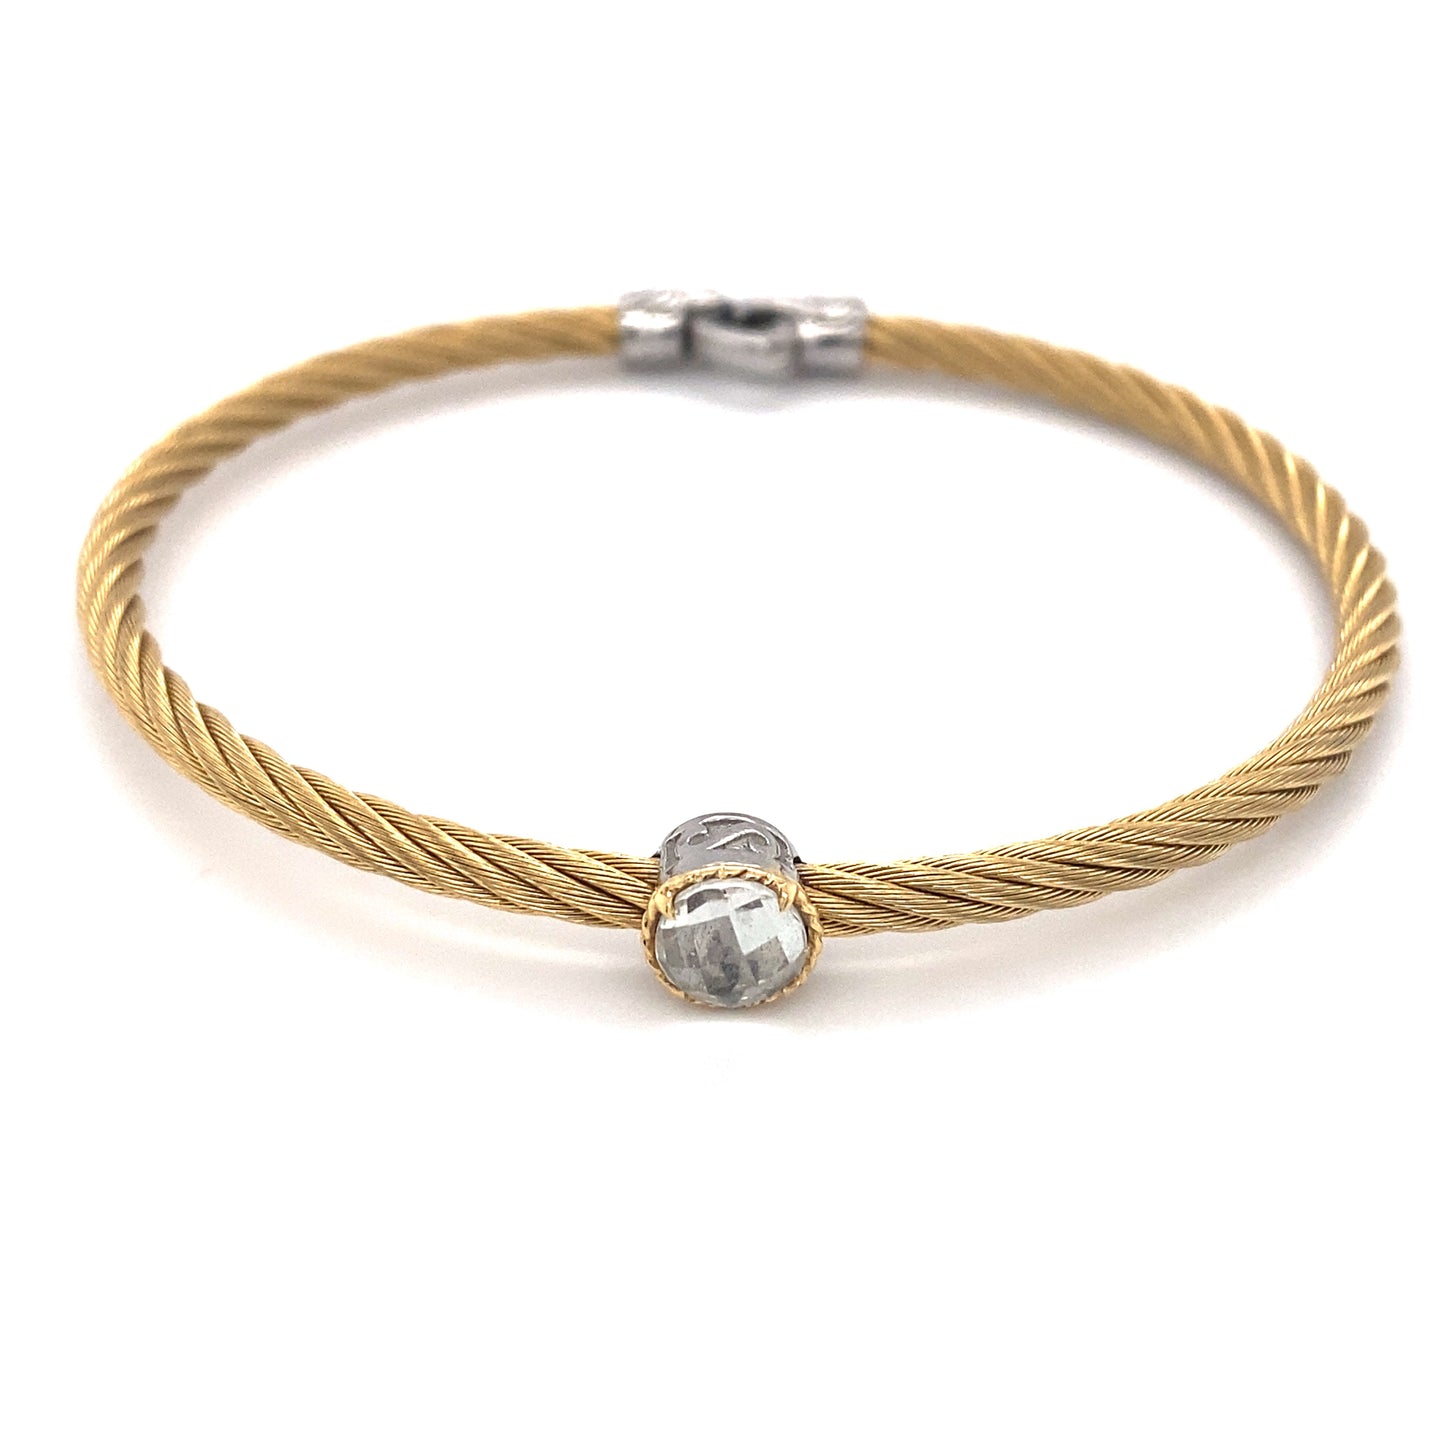 Charriol Bangle Bracelet with Faceted Quartz in Steel and 18K Gold